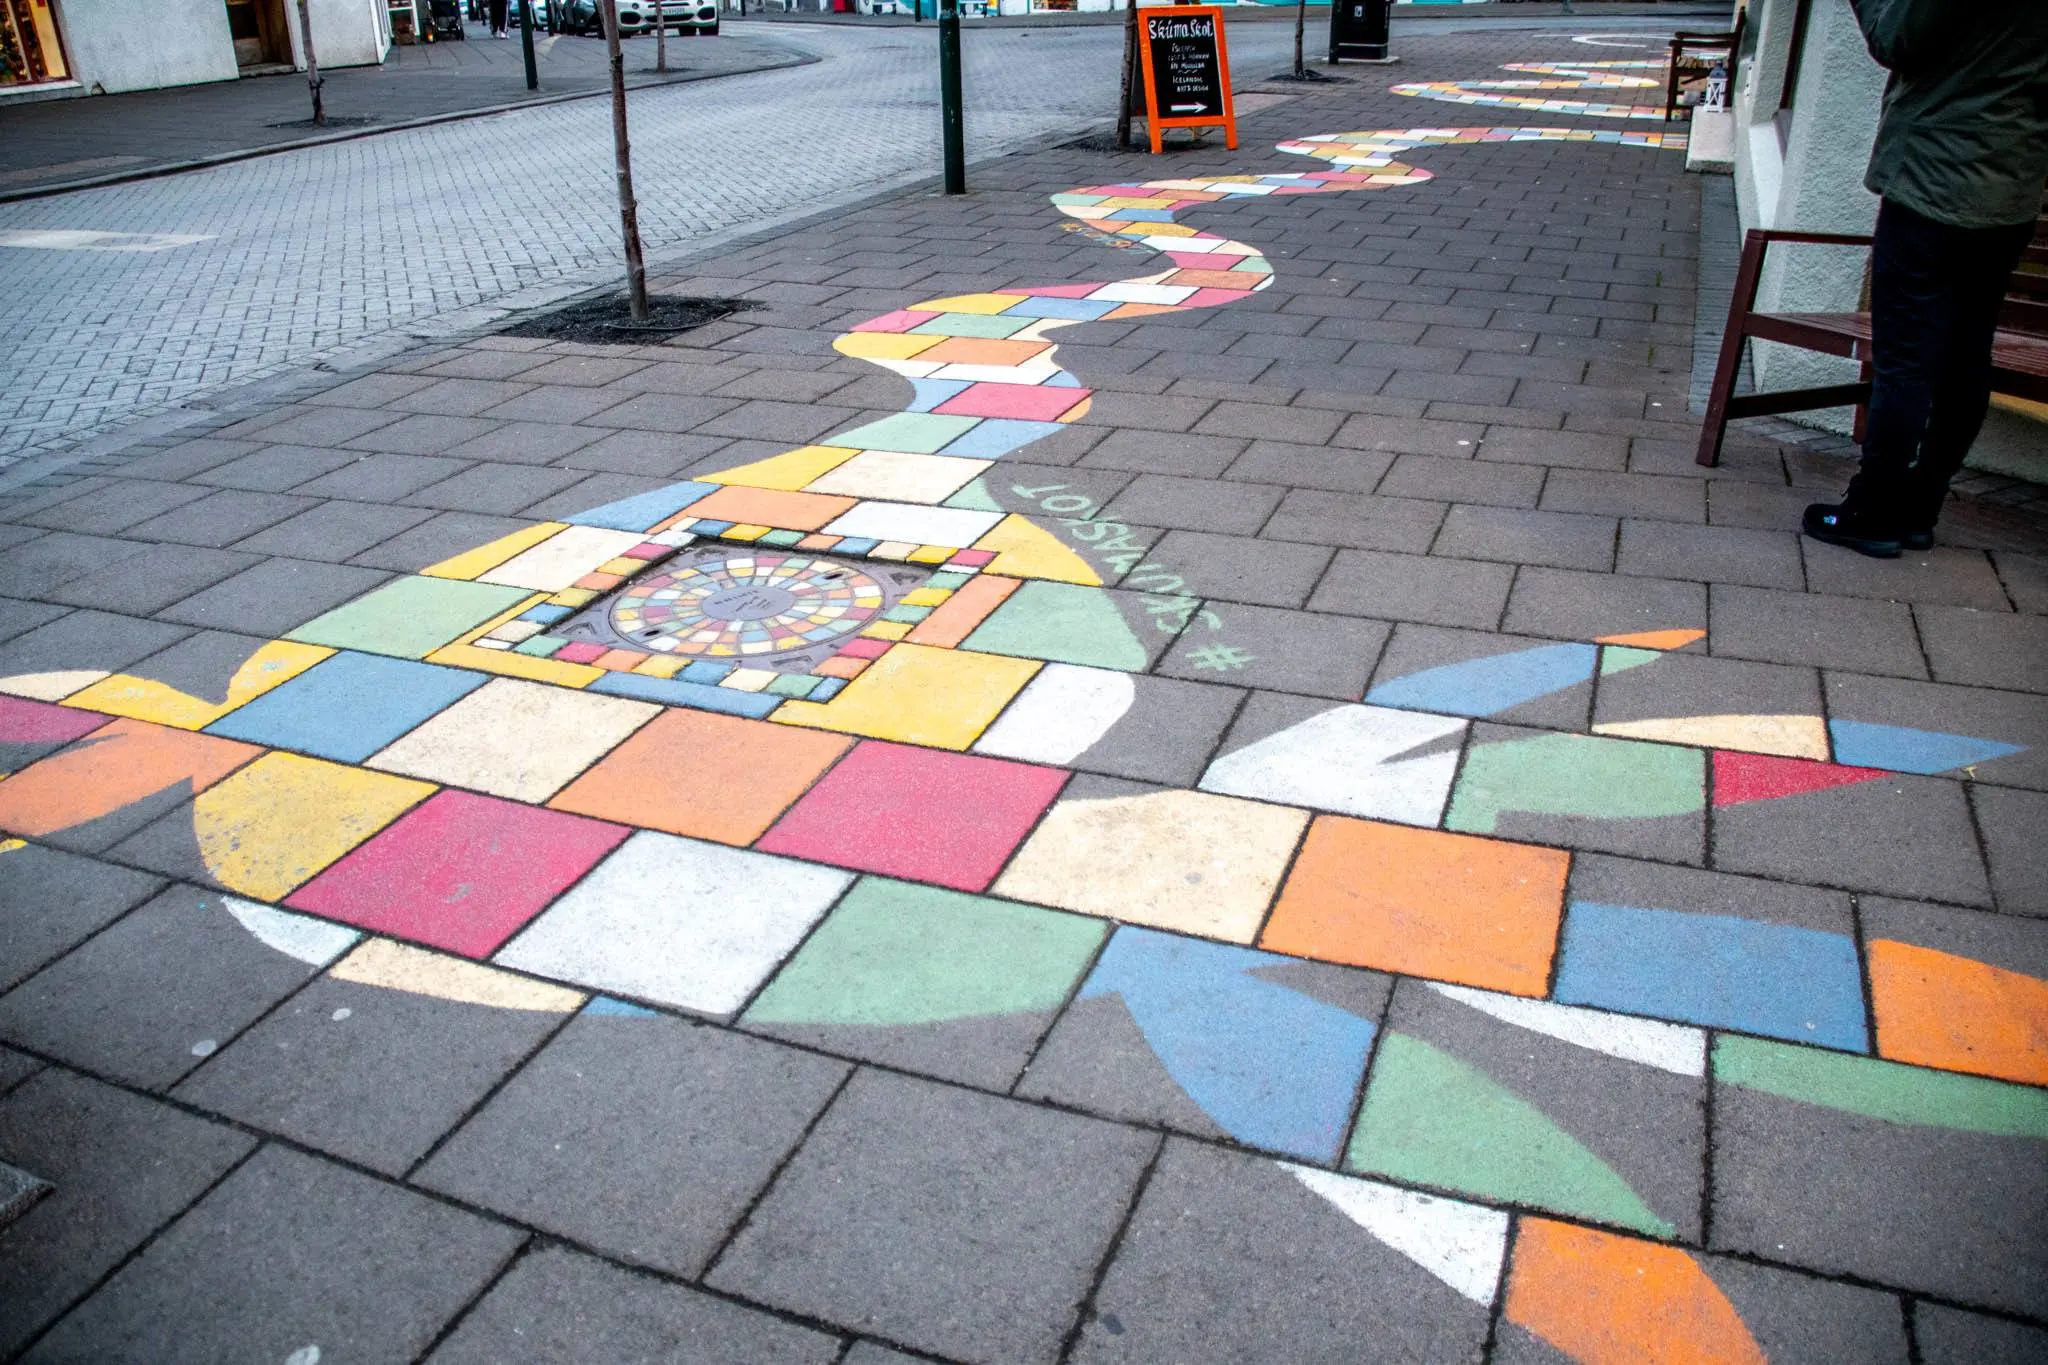 Iceland arts are both colorful and playful, as can be seen in this sidewalk art